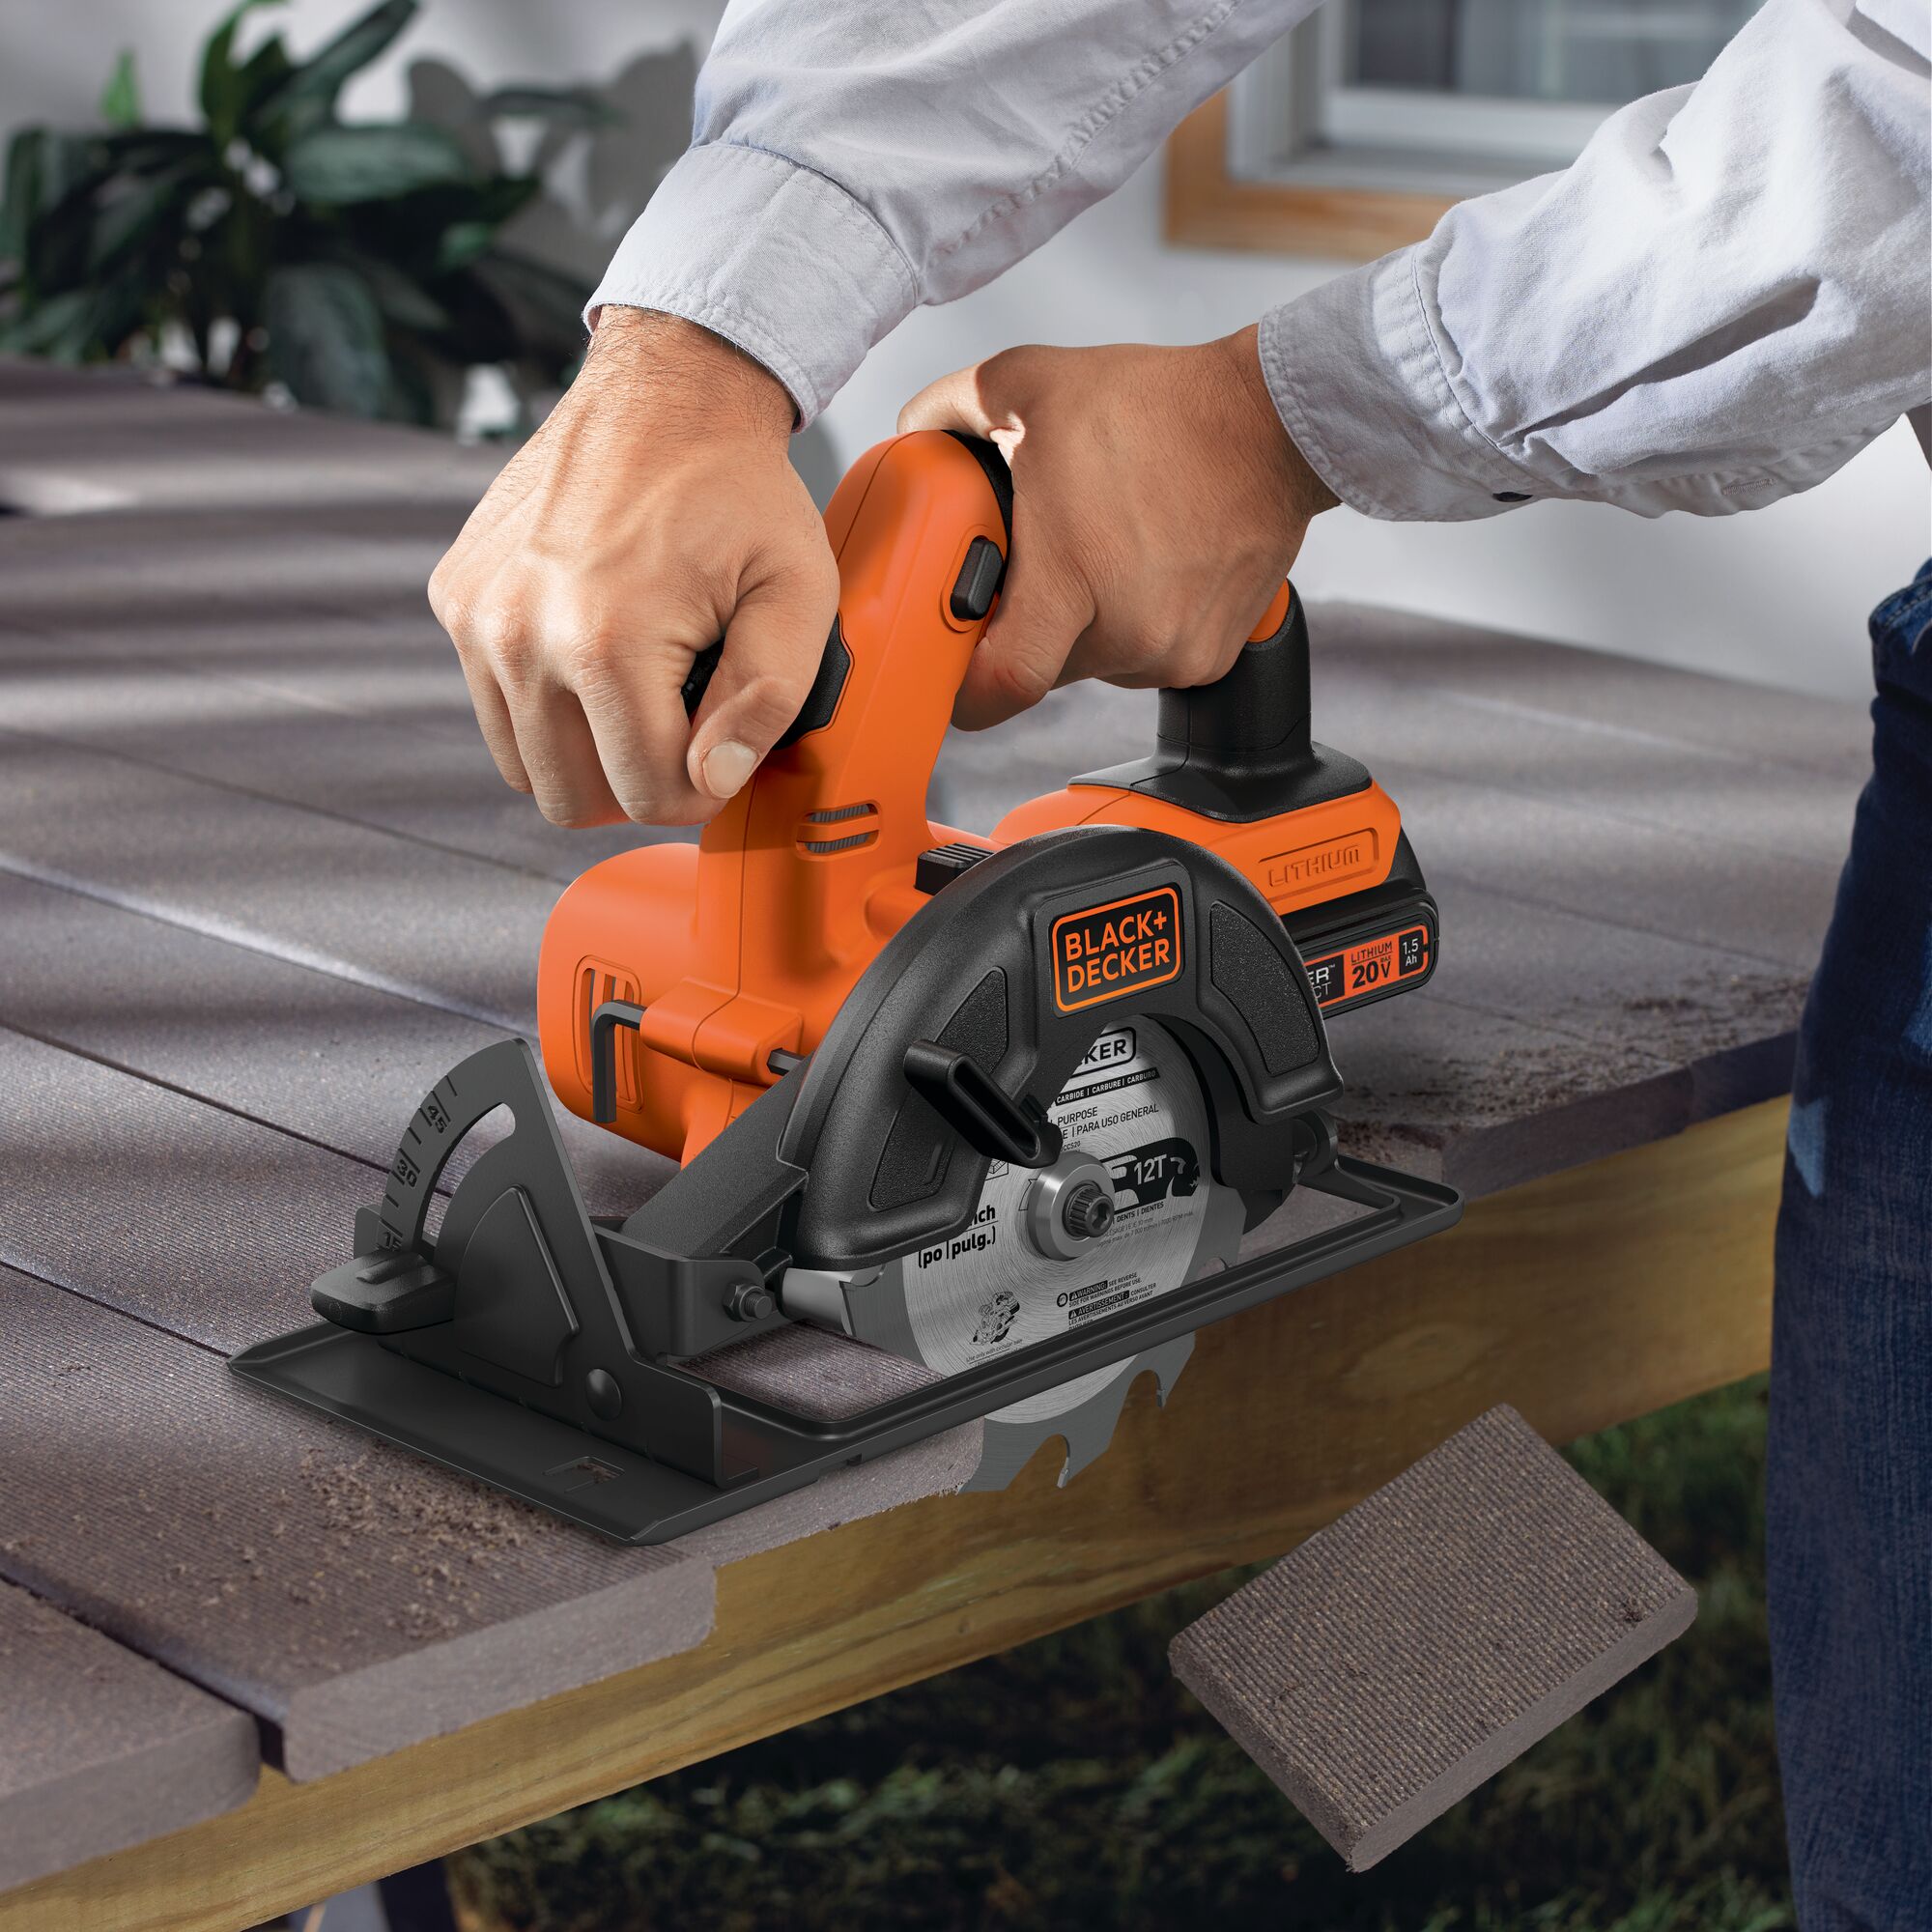 5 and half Inch Cordless Circular Saw being used for cutting wood.